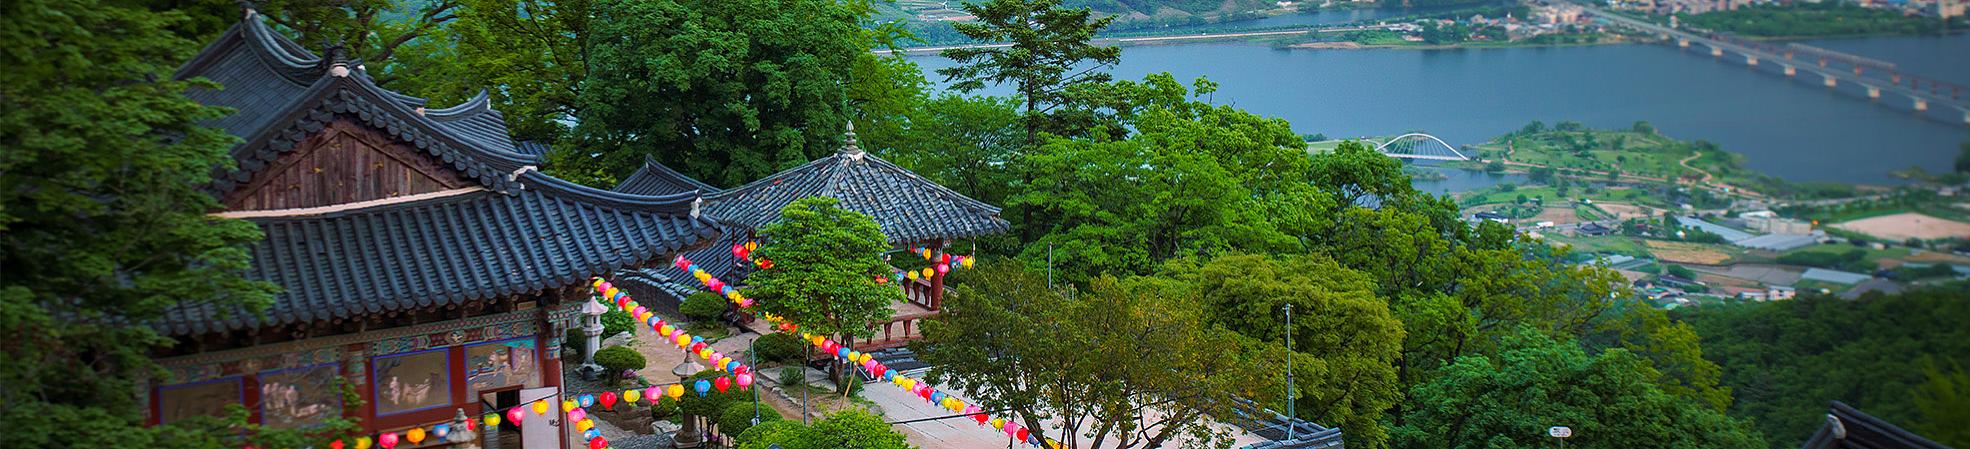 Top 6 Places to Visit in South Korea for the First Time